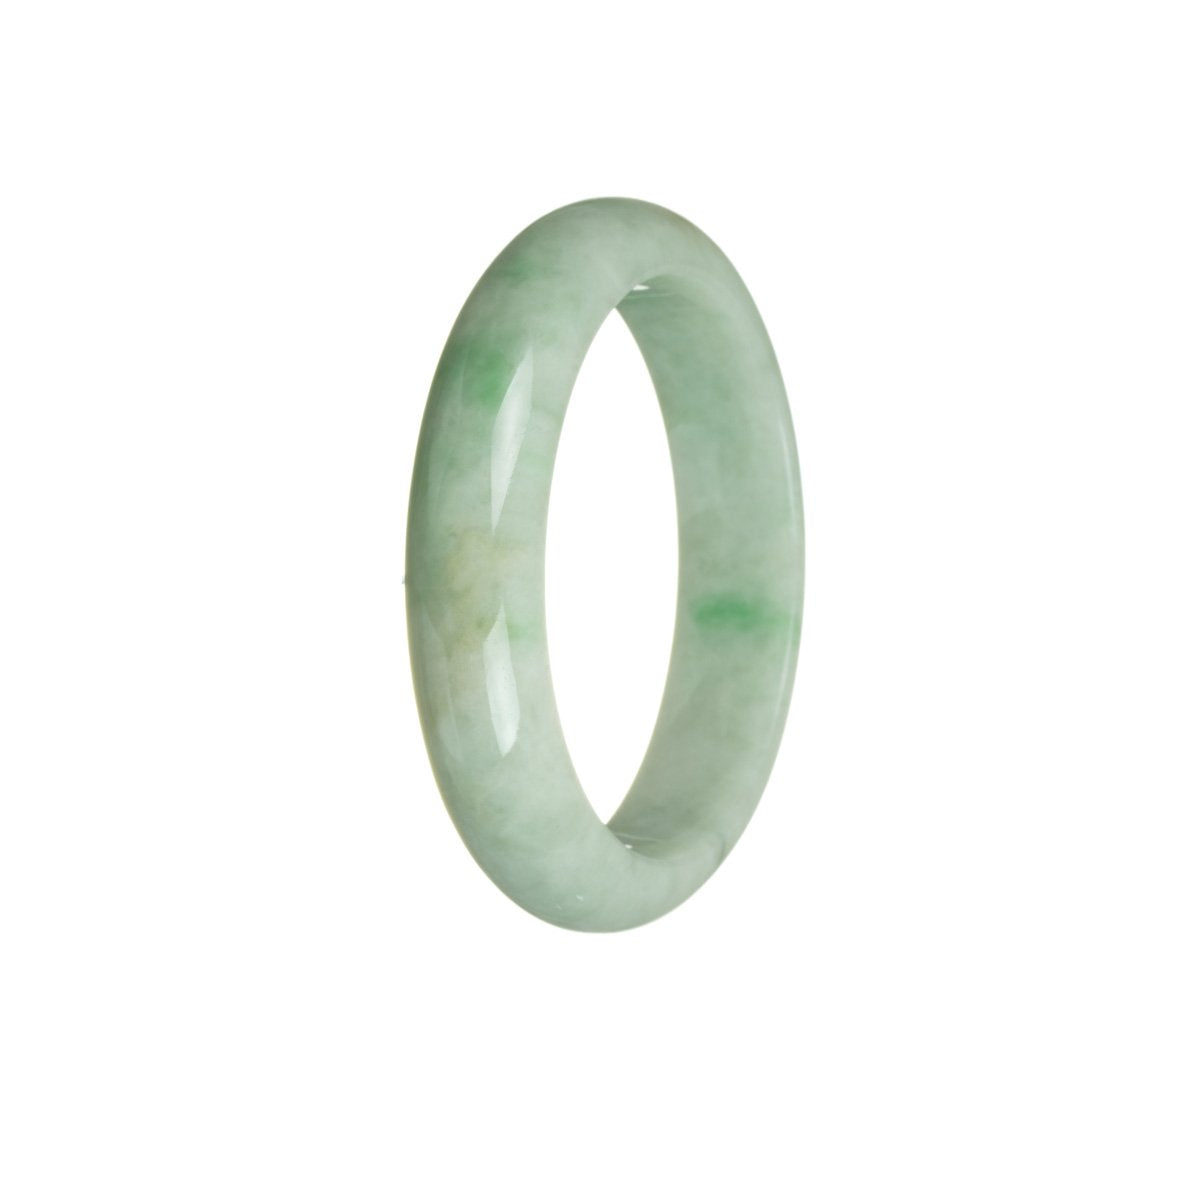 A half moon-shaped, 53mm authentic Grade A green traditional jade bangle bracelet from MAYS.